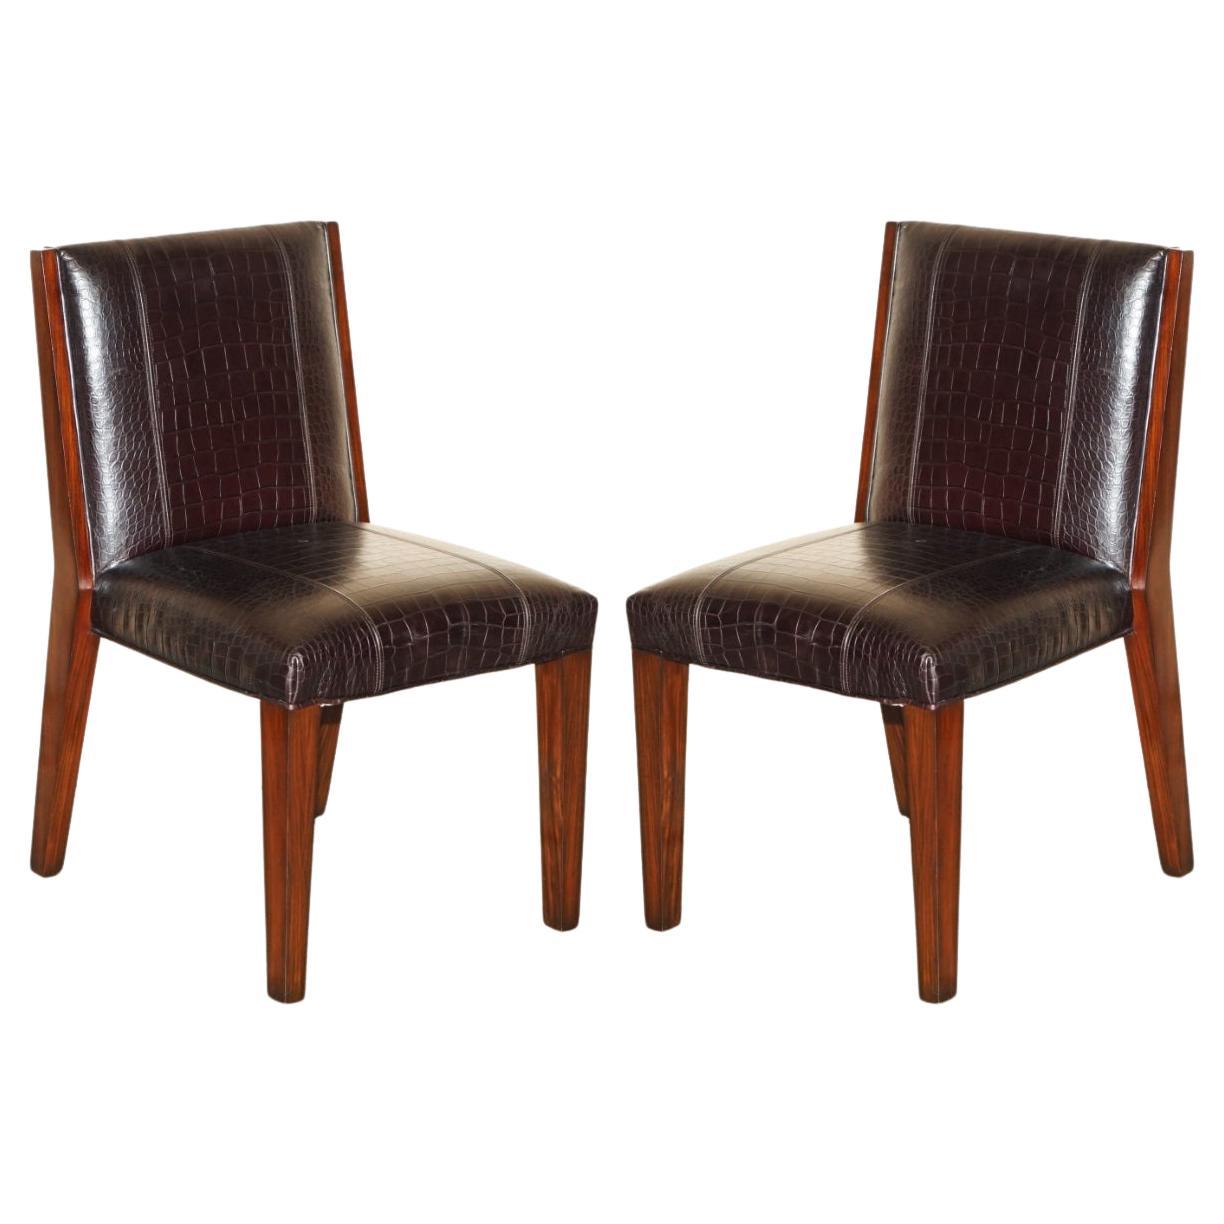 RALPH LAUREN METROPOLIS SiDE OCCASIONAL CROCODILE PATINA LEATHER DINING CHAIRS